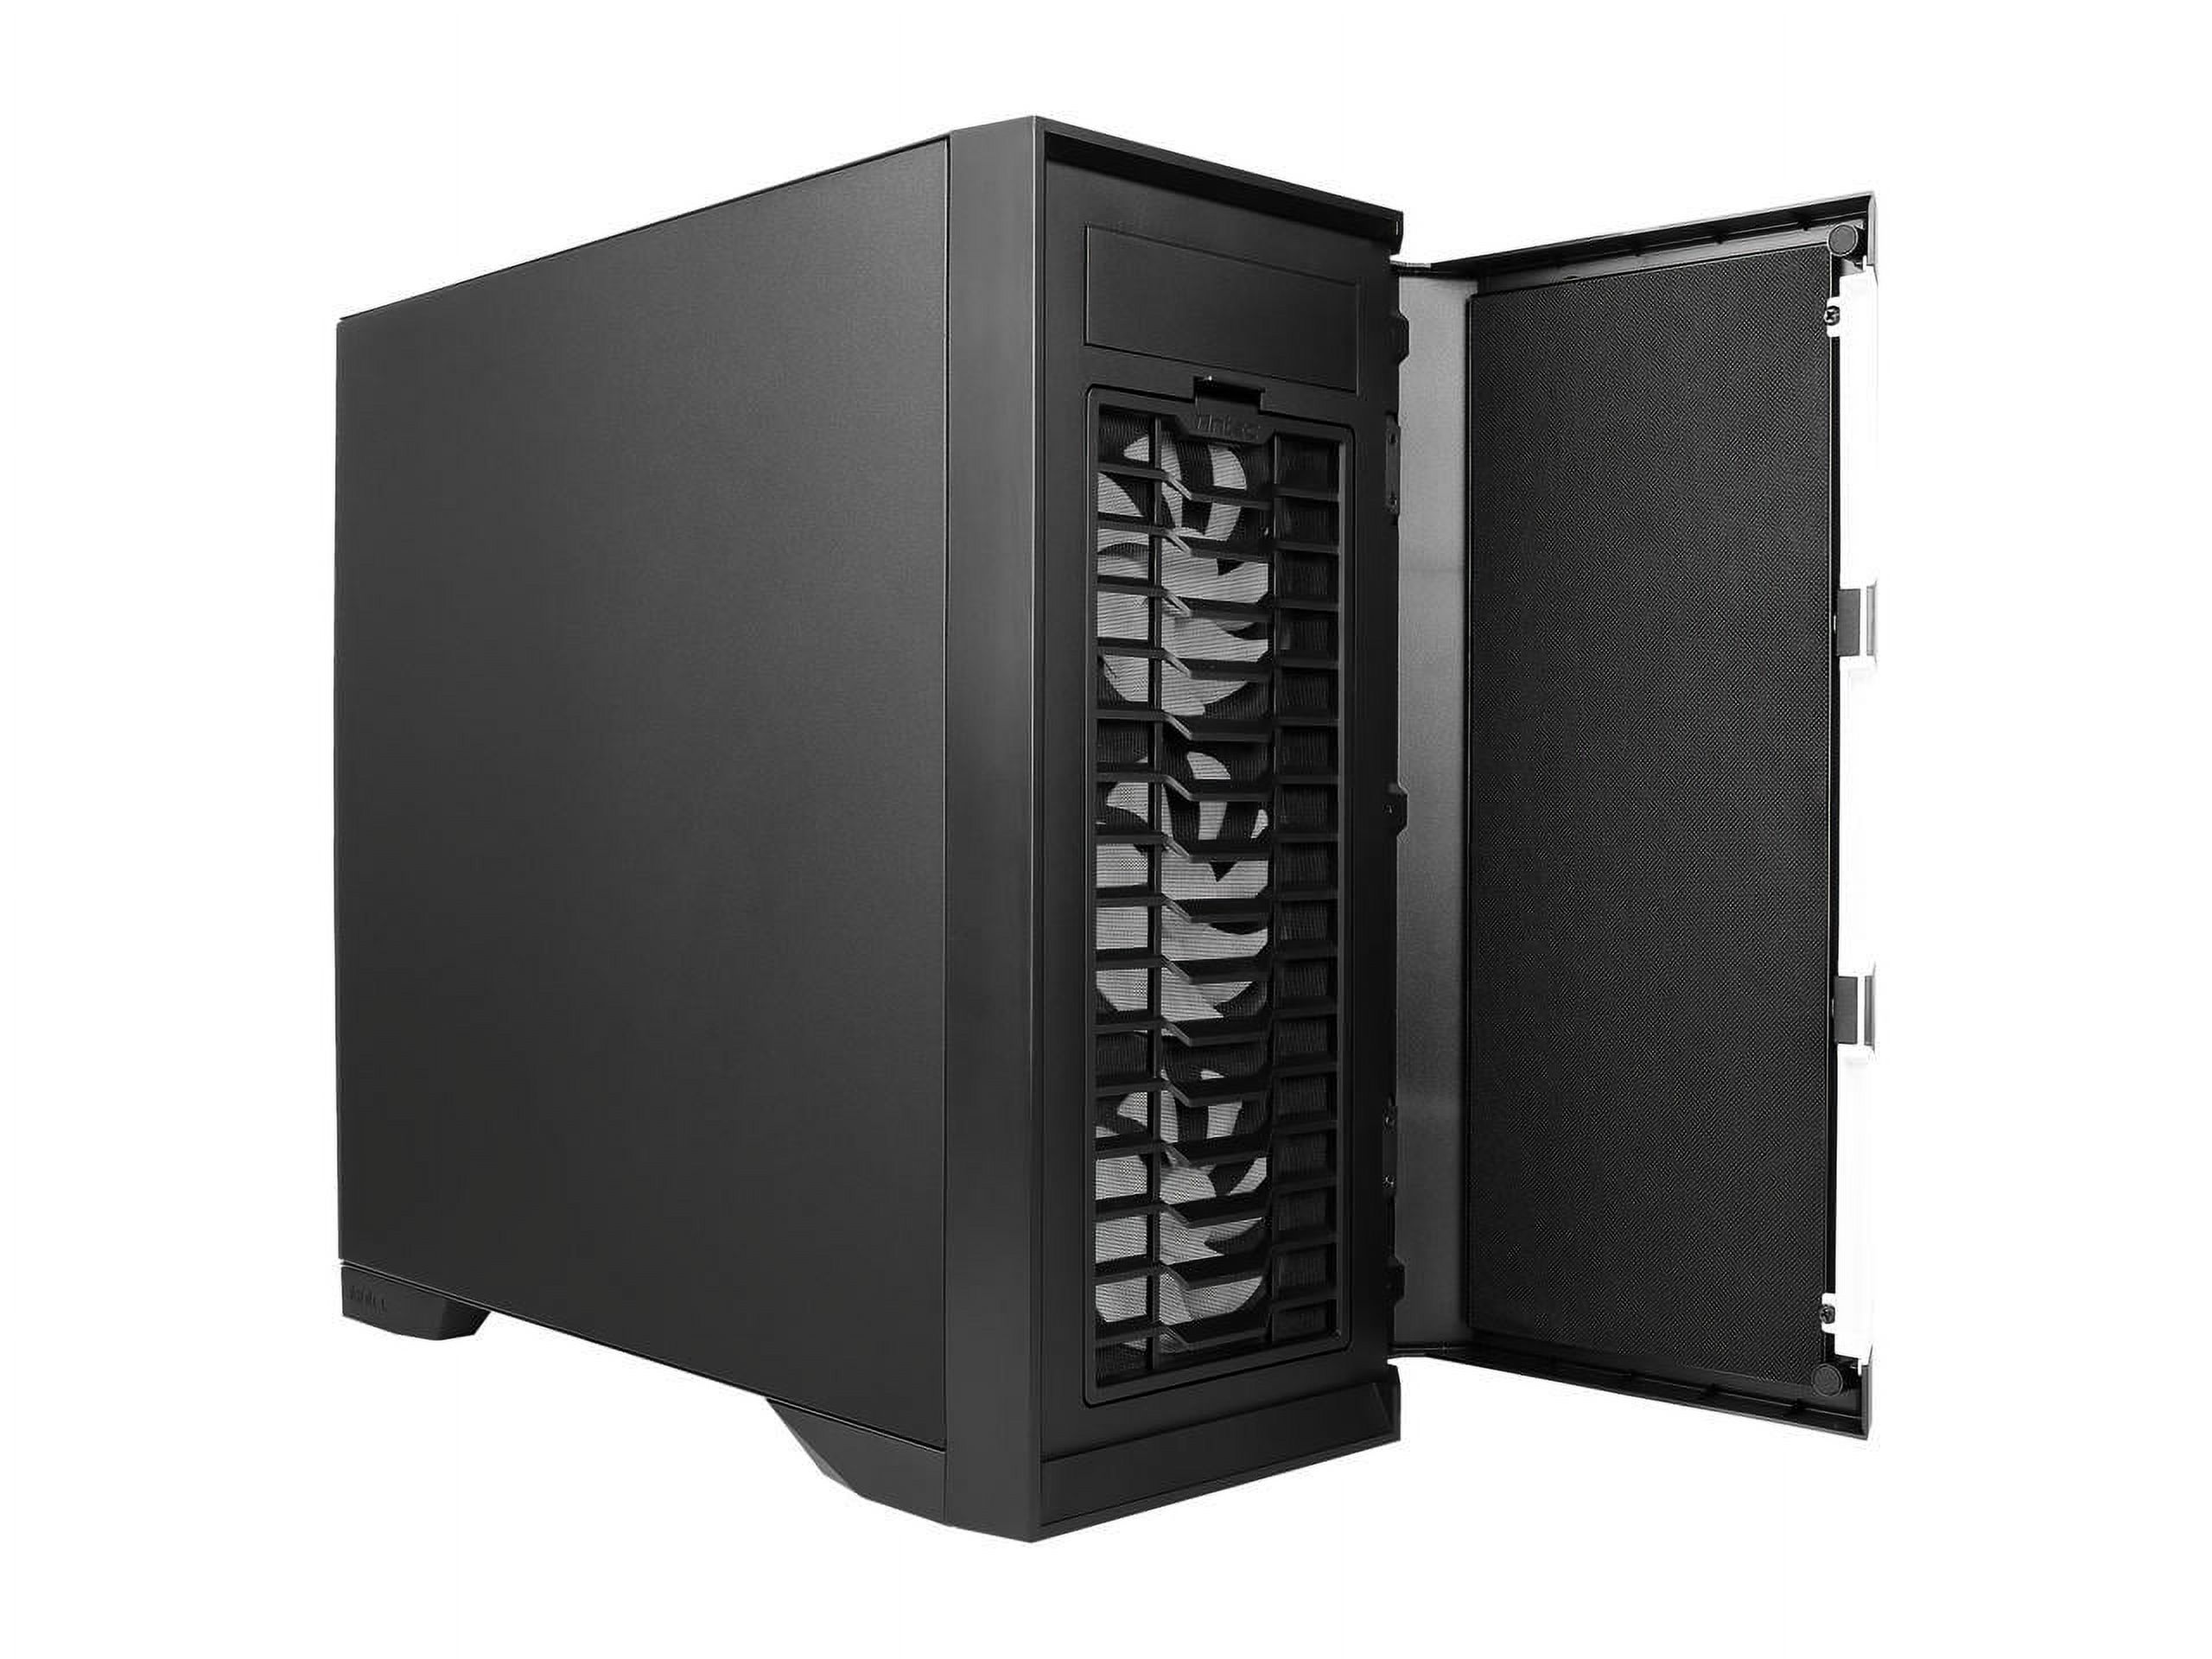 Antec Performance Series P101 Silent Black 0.8mm SPCC ATX Mid Tower Case with 8 x 3.5" HDD / 2.5" SSD Removable Bays - image 4 of 19